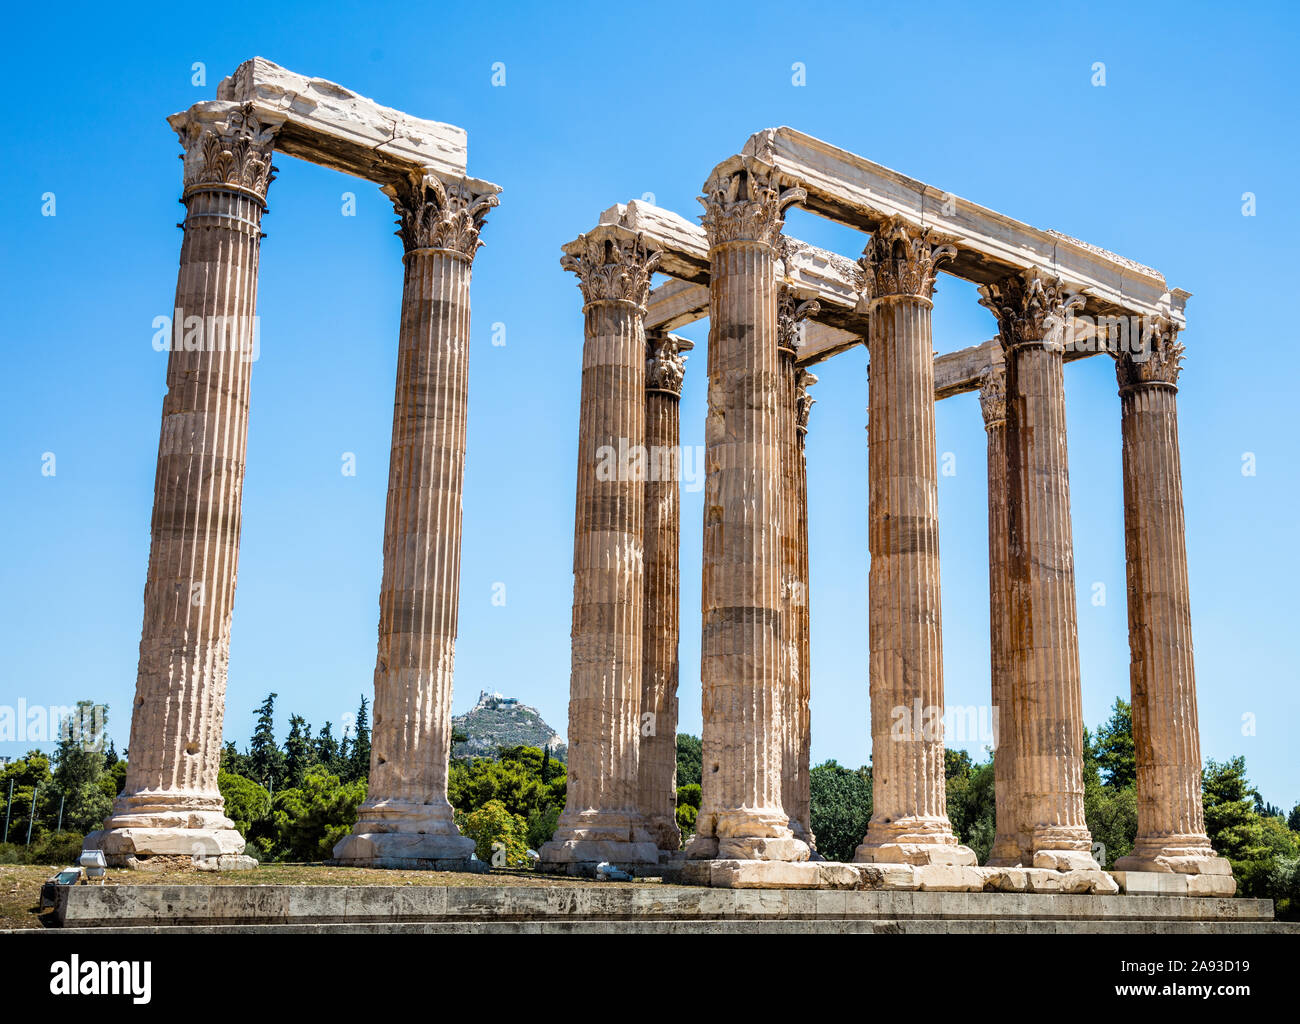 Temple of Olympian Zeus, also known as the Olympieion or Columns of the Olympian Zeus, in Athens, Greece. Stock Photo